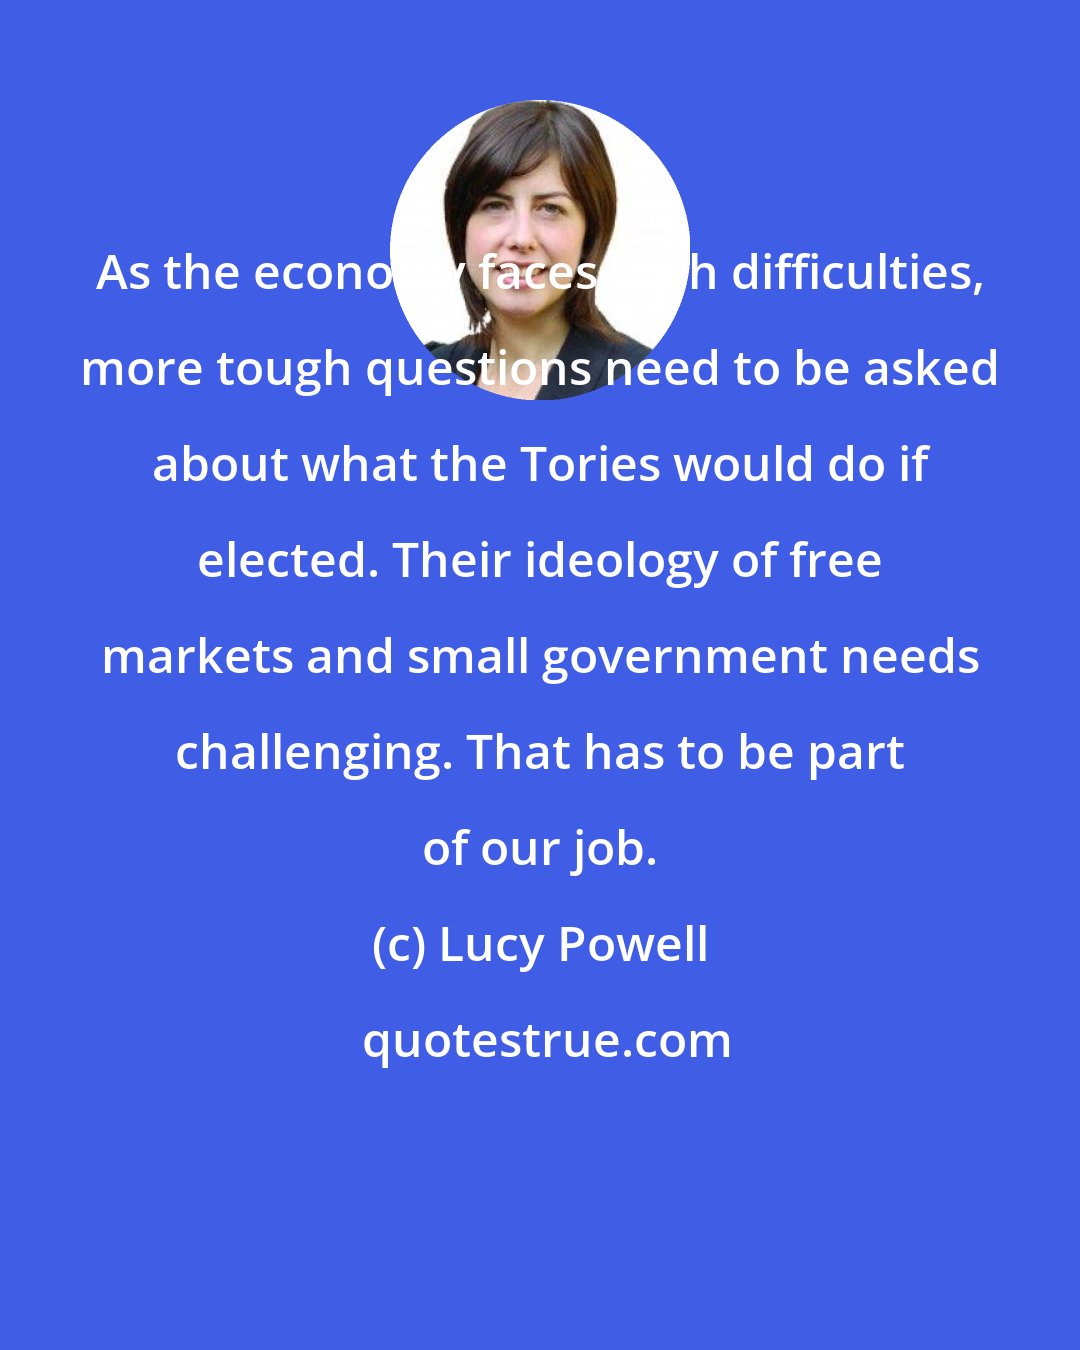 Lucy Powell: As the economy faces such difficulties, more tough questions need to be asked about what the Tories would do if elected. Their ideology of free markets and small government needs challenging. That has to be part of our job.